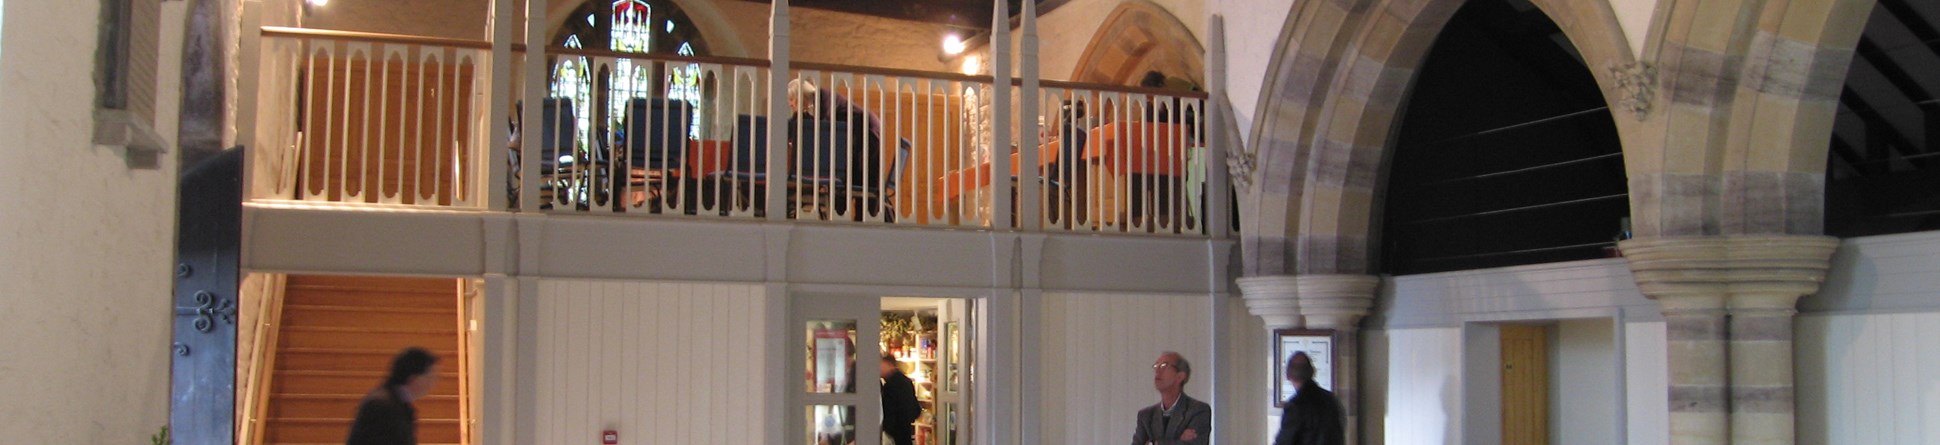 Interior of a church in Yarpole where a gallery and shop have been added and the space made more flexible.